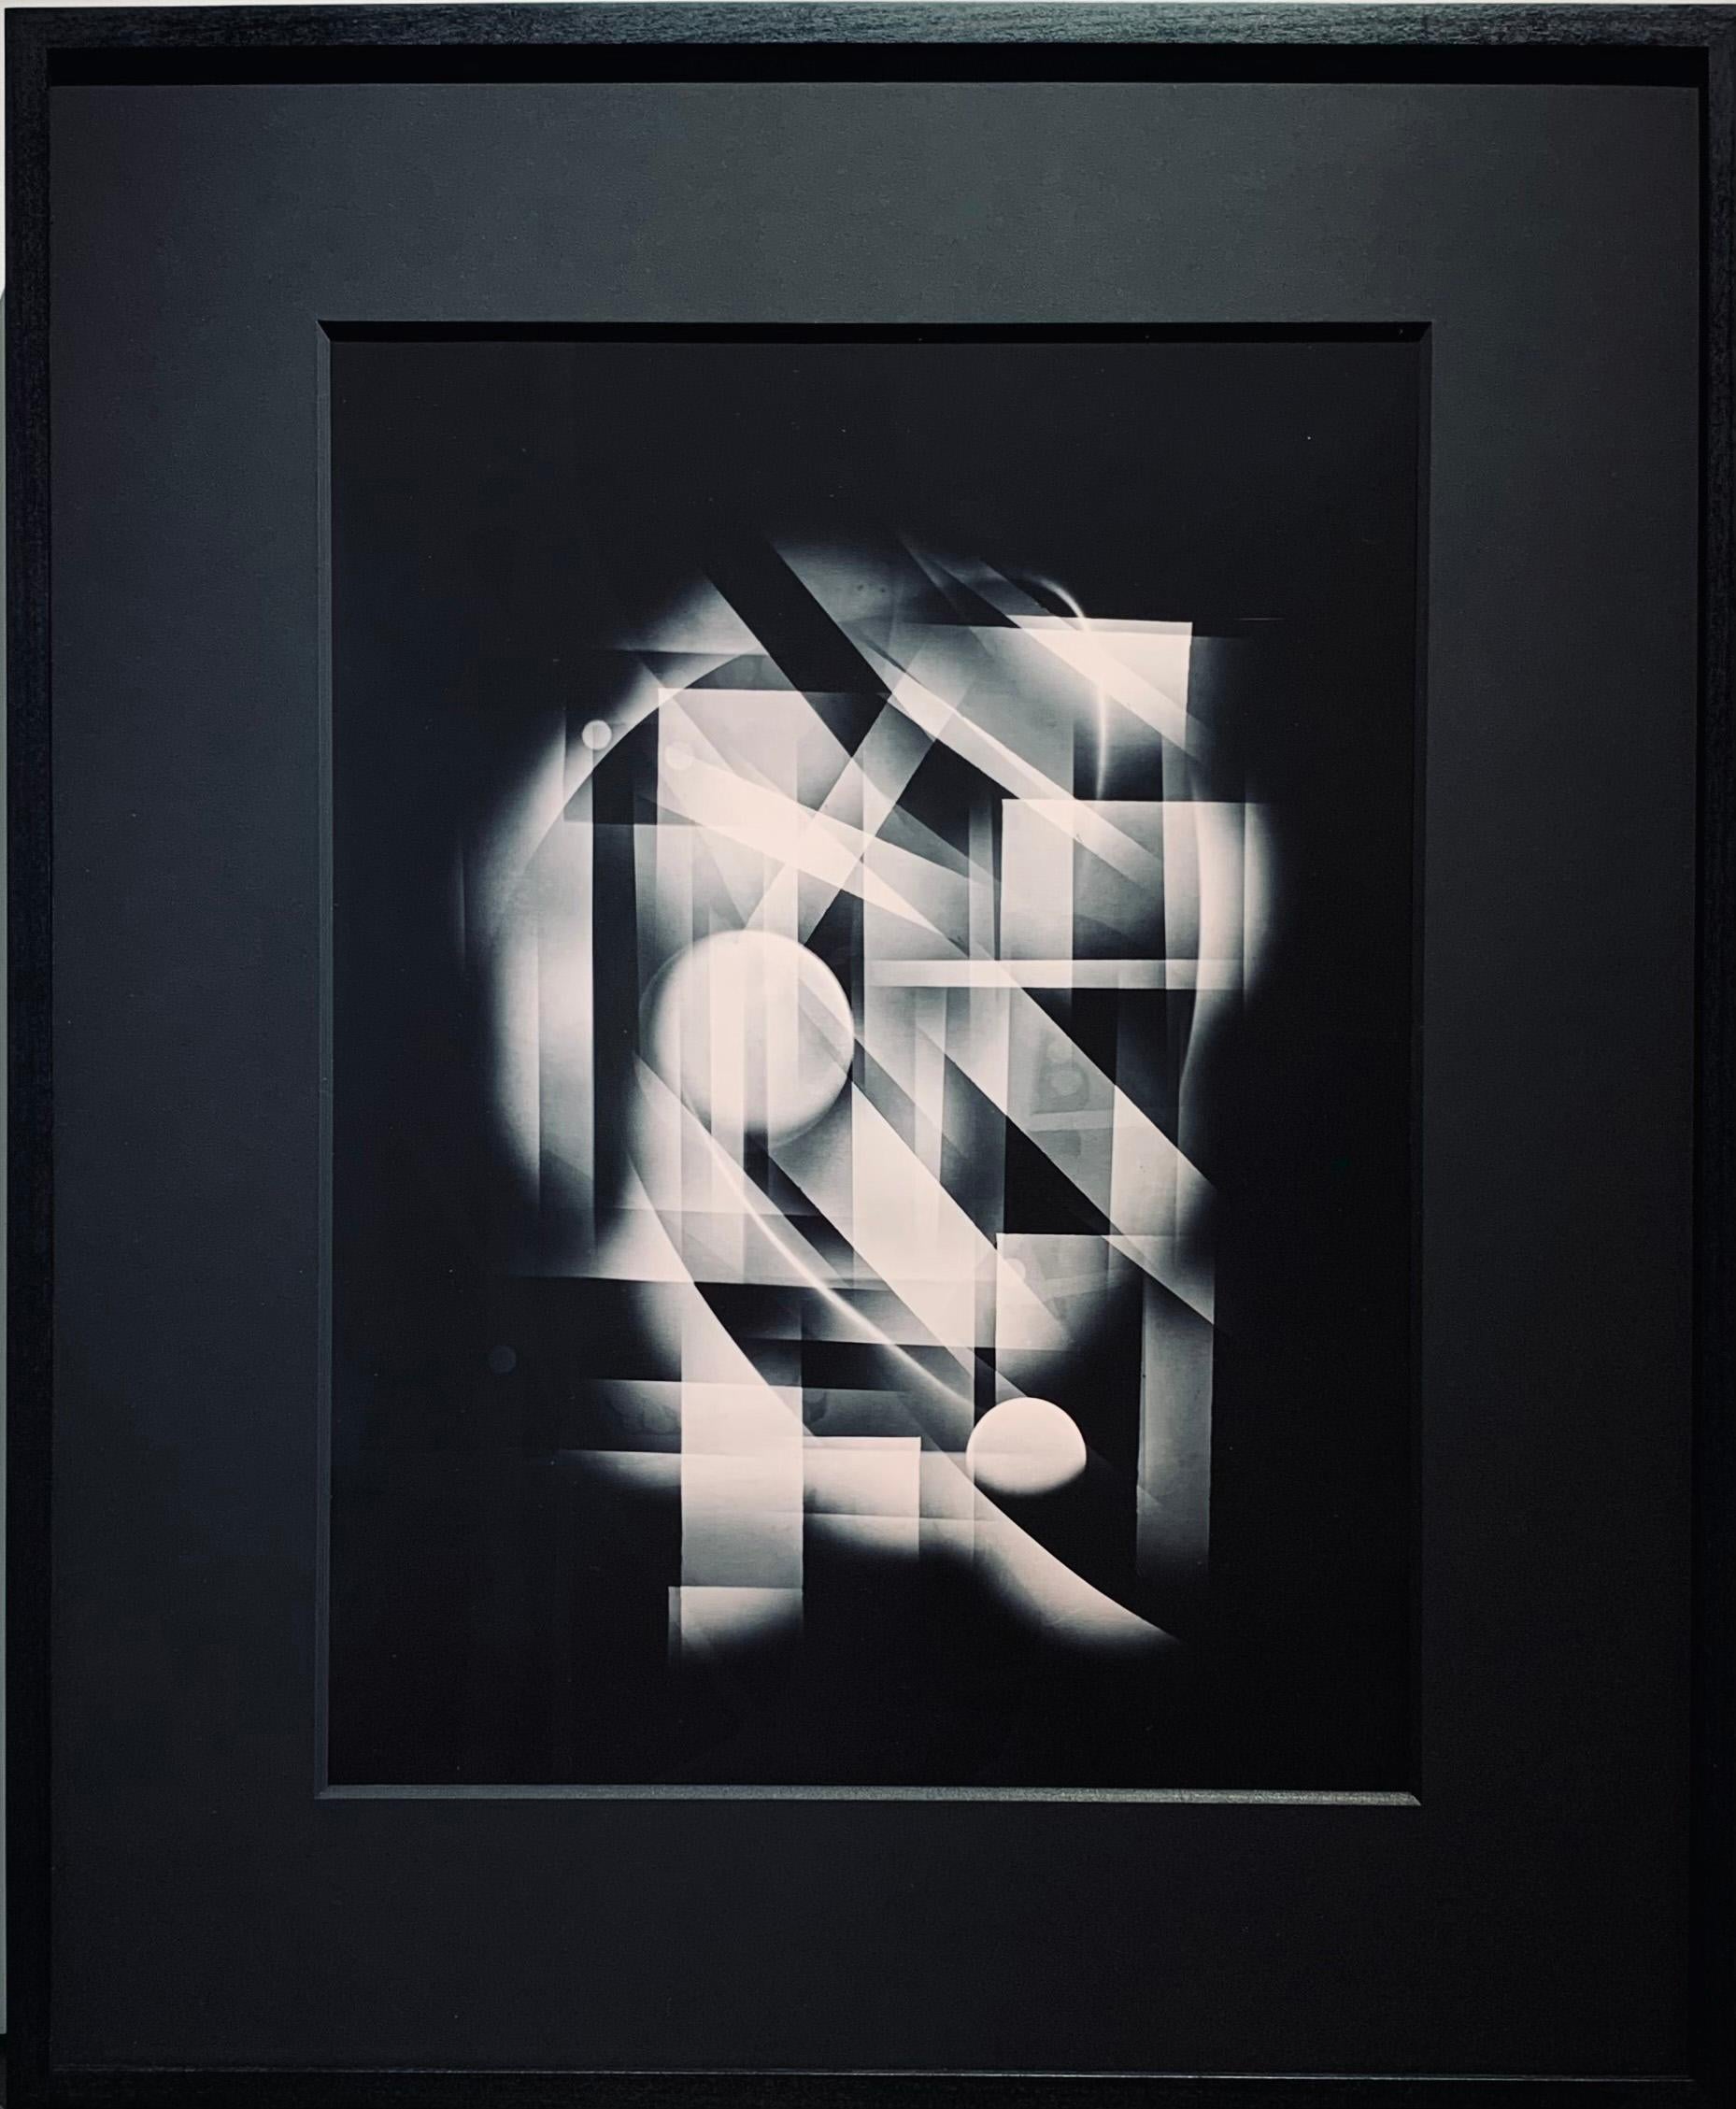 Michael G Jackson Abstract Print - Abstract Black and White Luminogram Print of Central Park in New York City